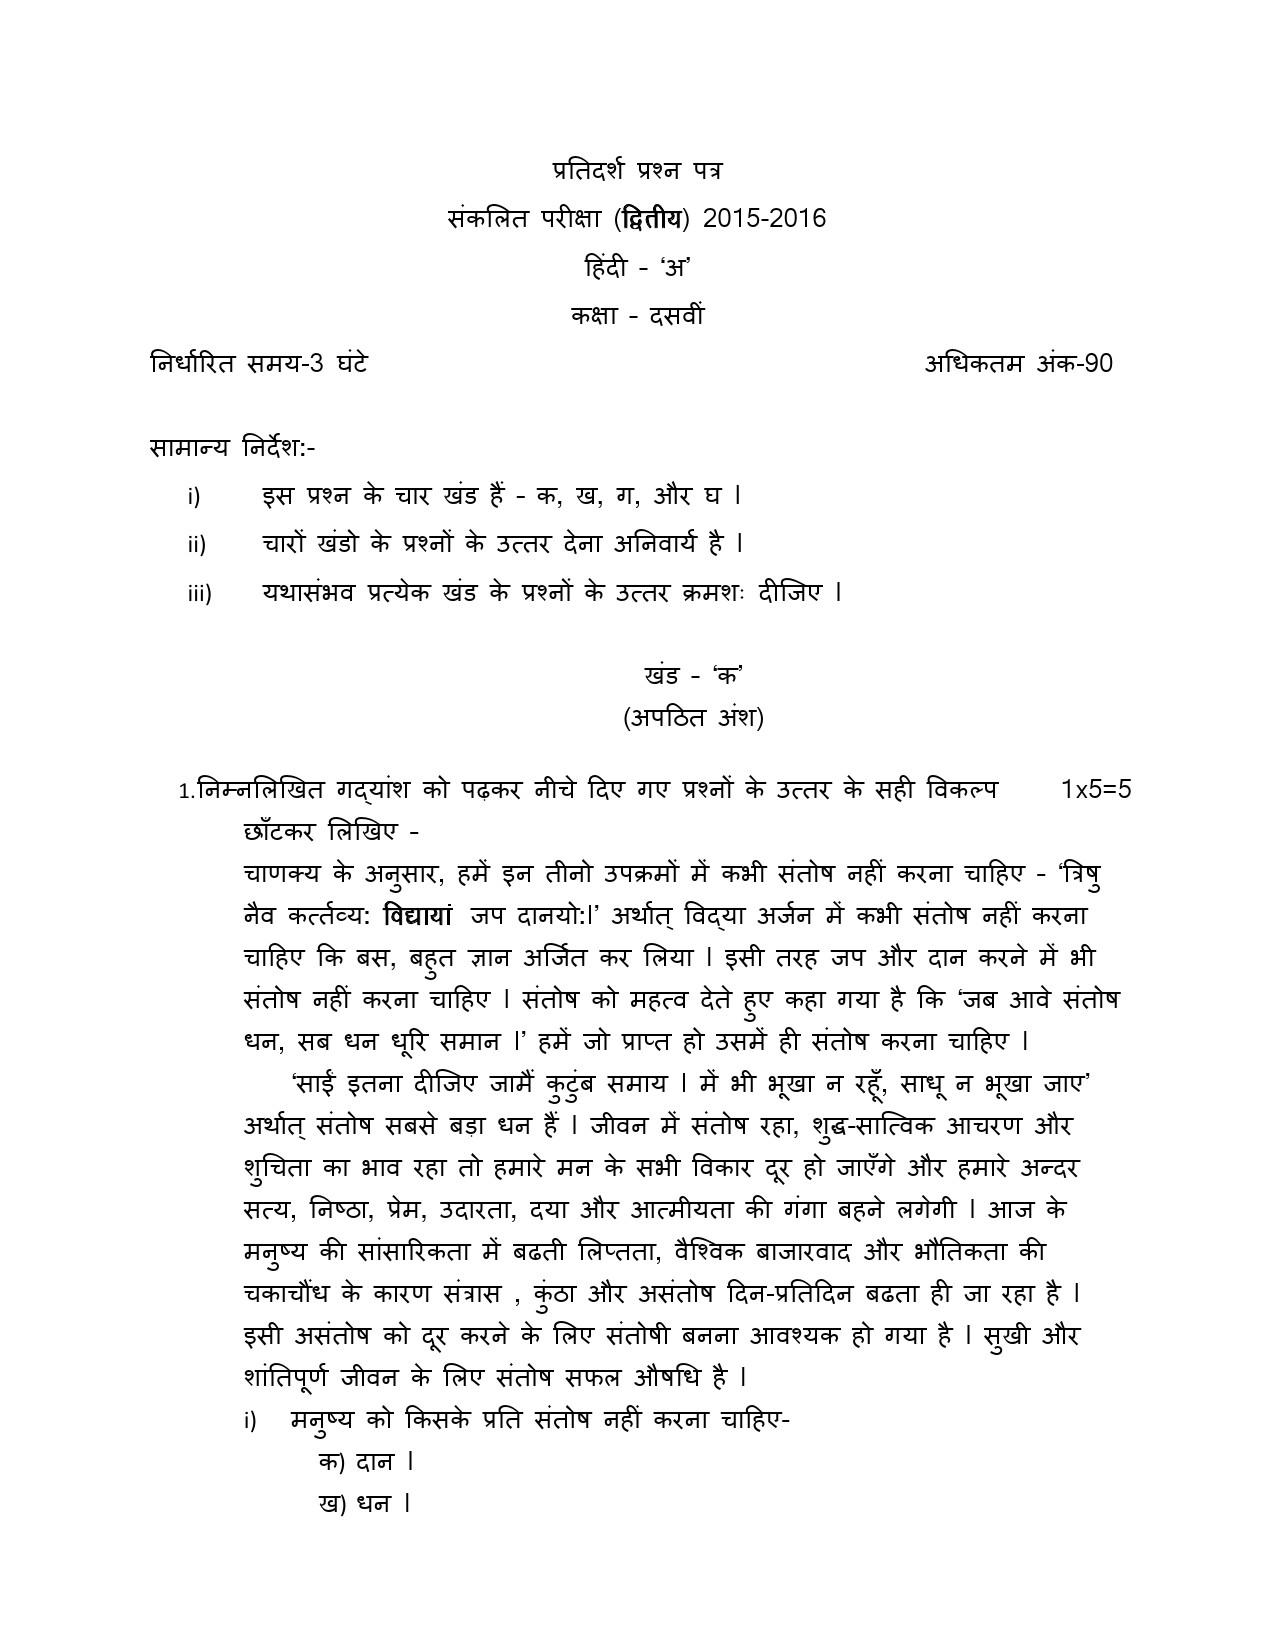 Hindi A CBSE Class X Sample Question Paper 2015 16 - Image 1